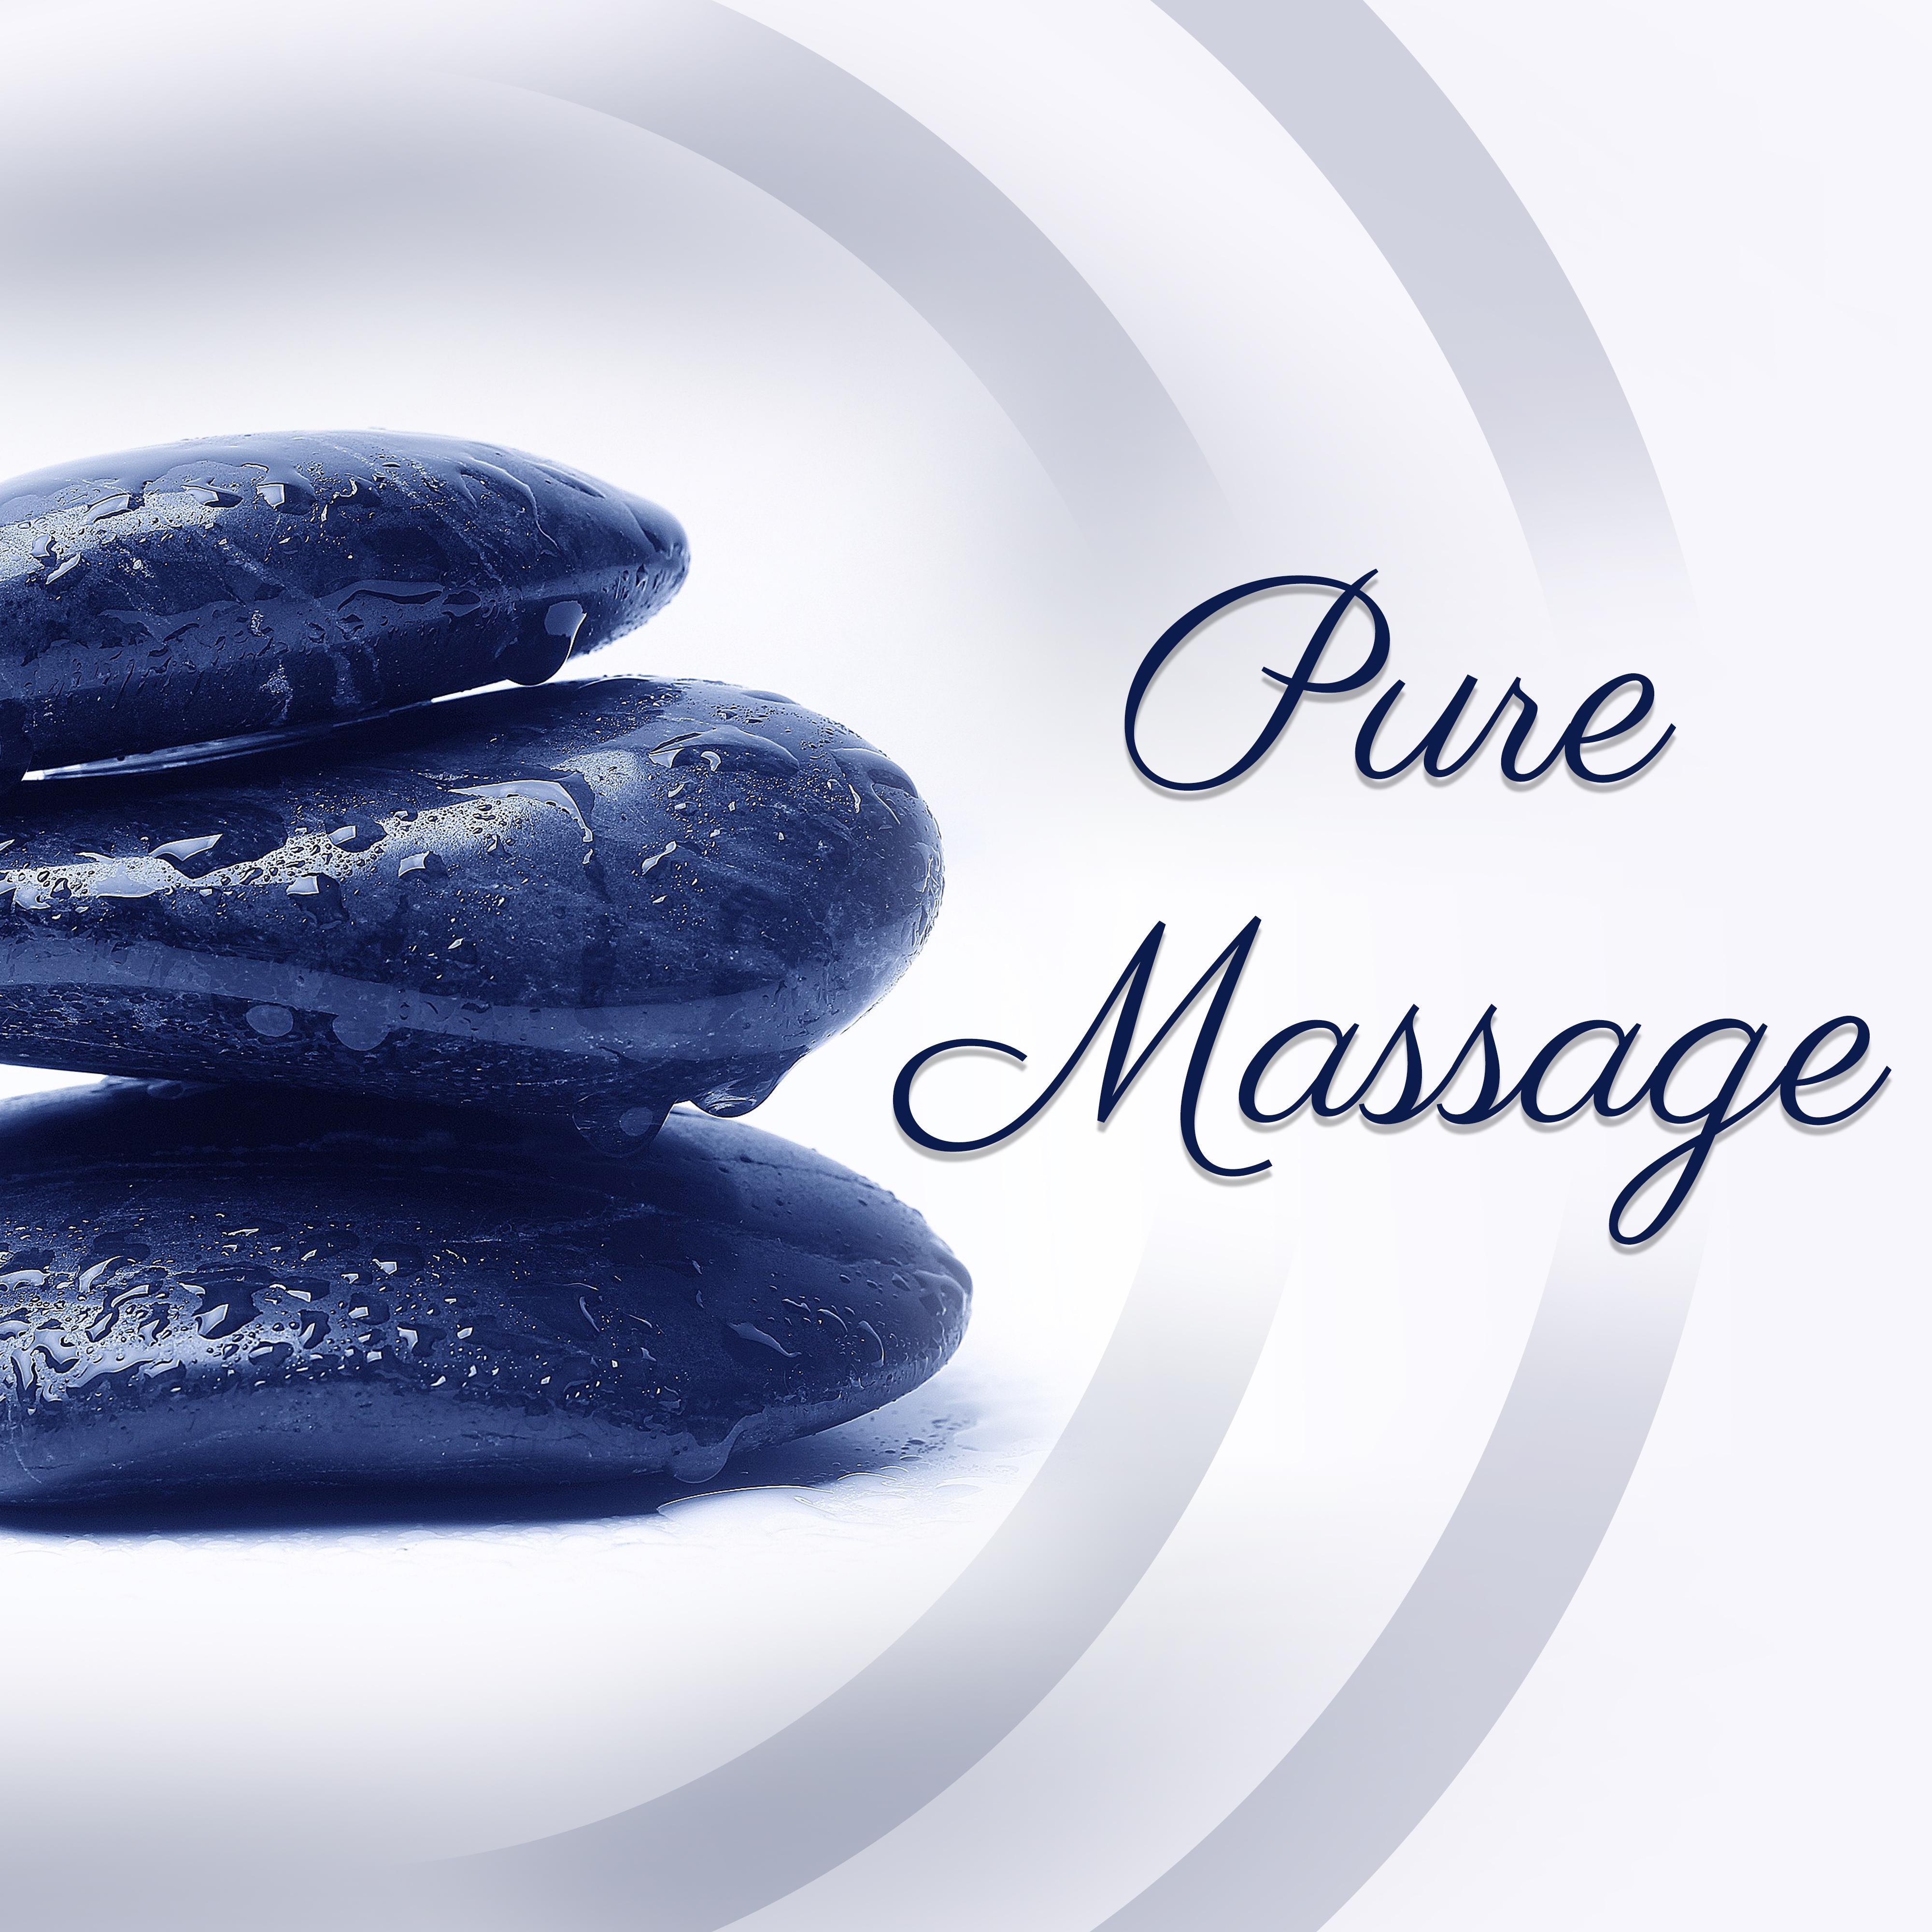 Pure Massage  Spa Music, Relaxation Wellness, Nature Sounds, Relaxing Waves, Singing Birds, Zen Garden, Spa Relaxation Music, Soft Melodies